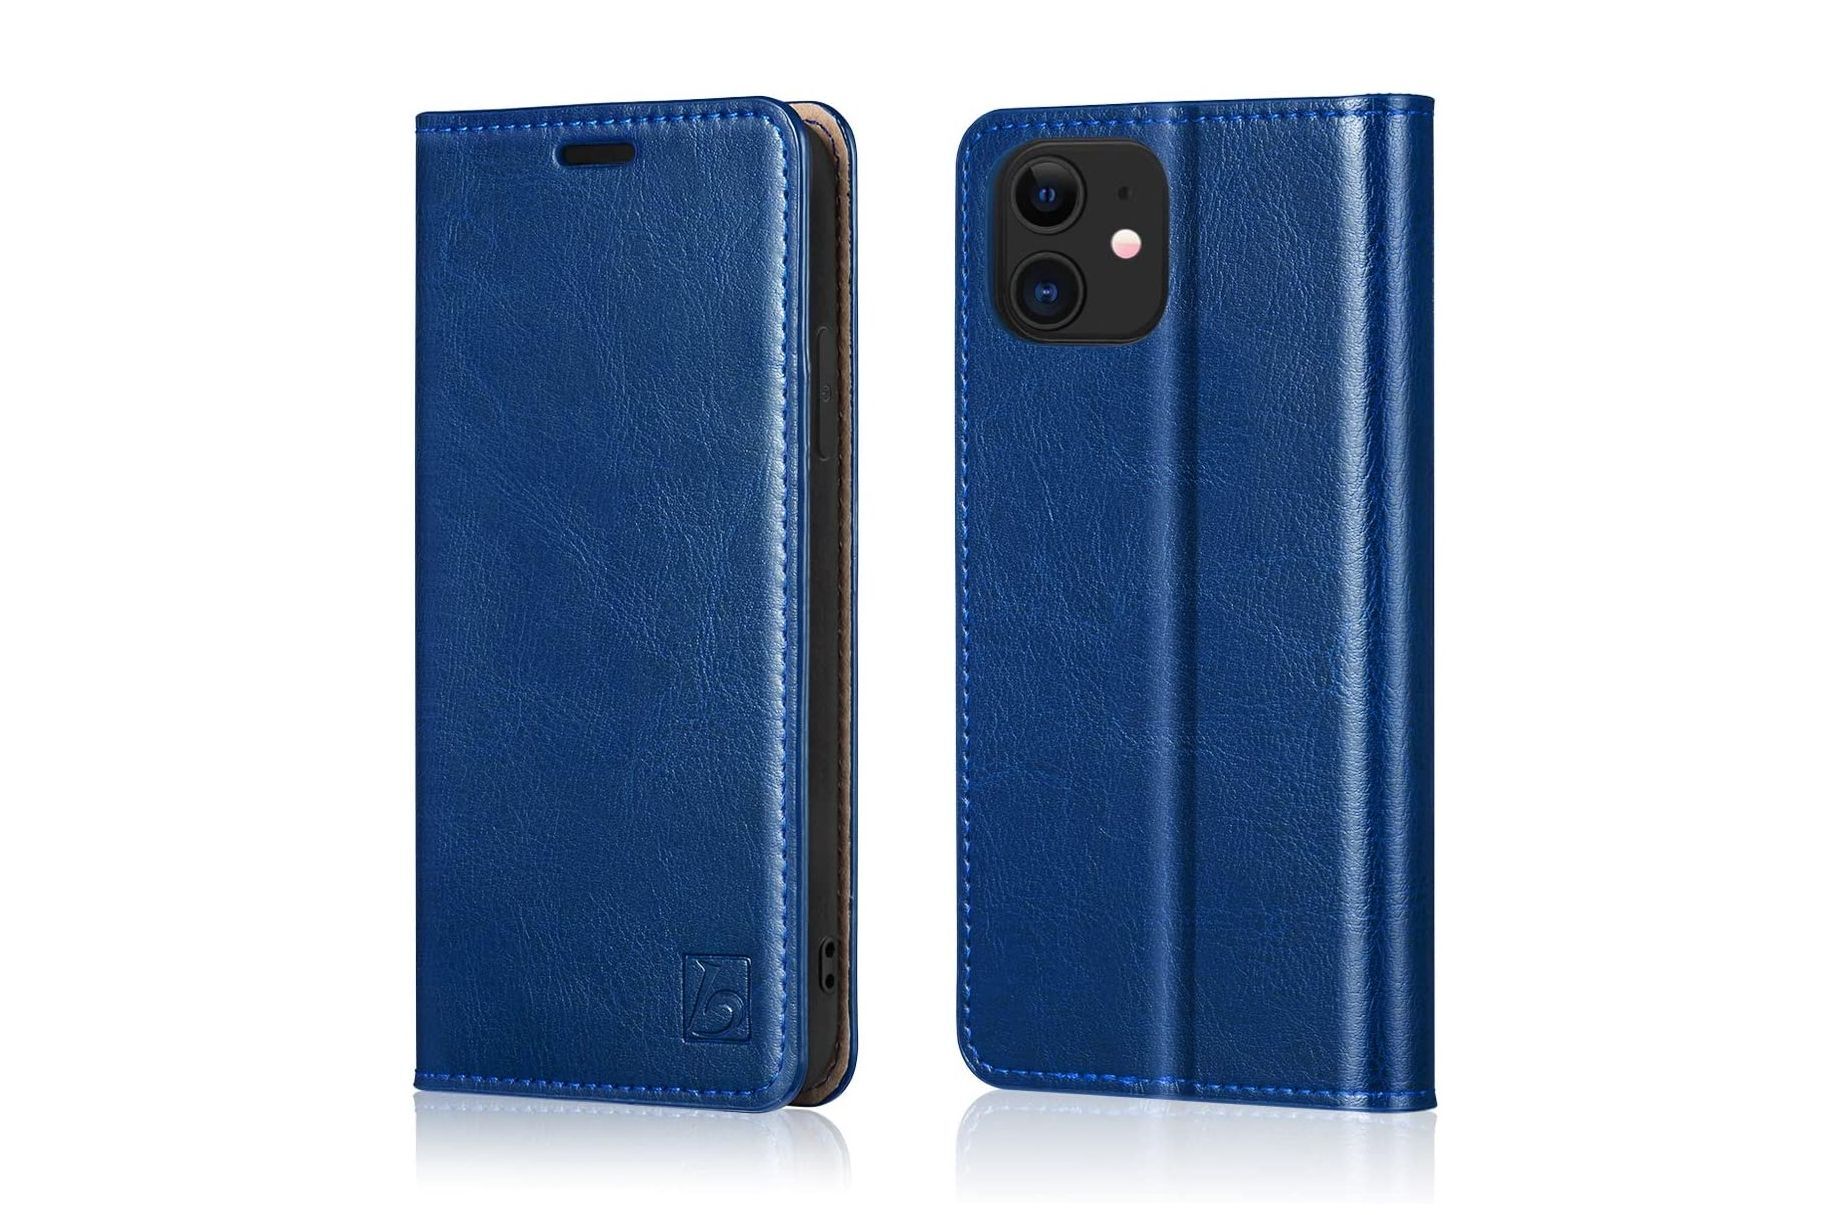 Belemay iPhone 12 Mini Wallet Case - The best iPhone 12 mini cases you can get - updated July 2022